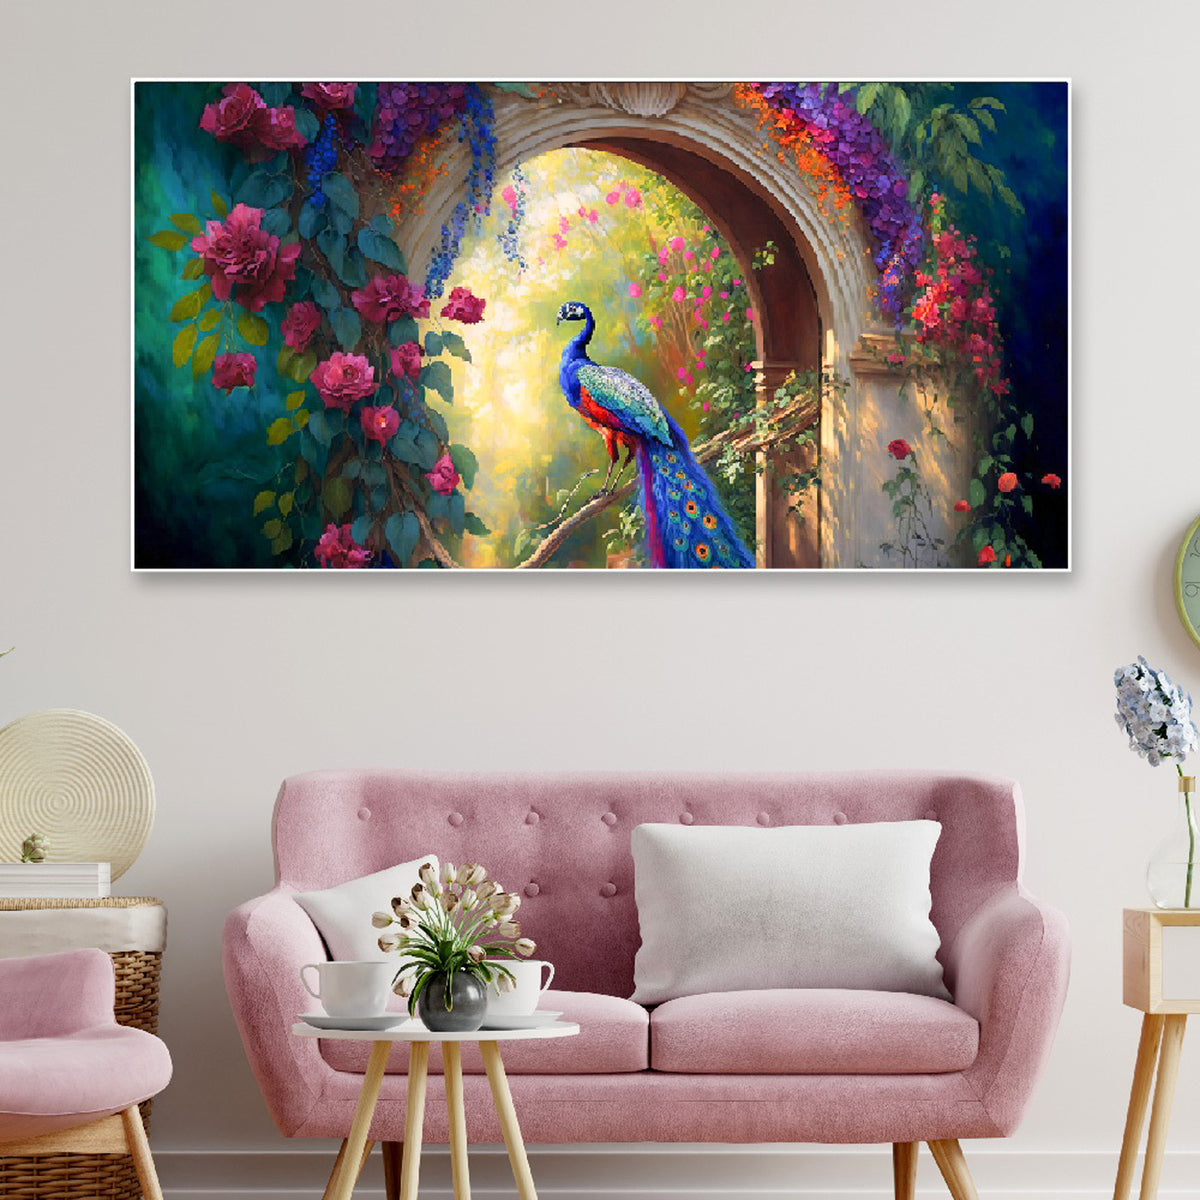 Enchanting Plumes: Floating Framed Peacock Canvas Wall Art for Home and Office Décor (48 x 24 )Inch